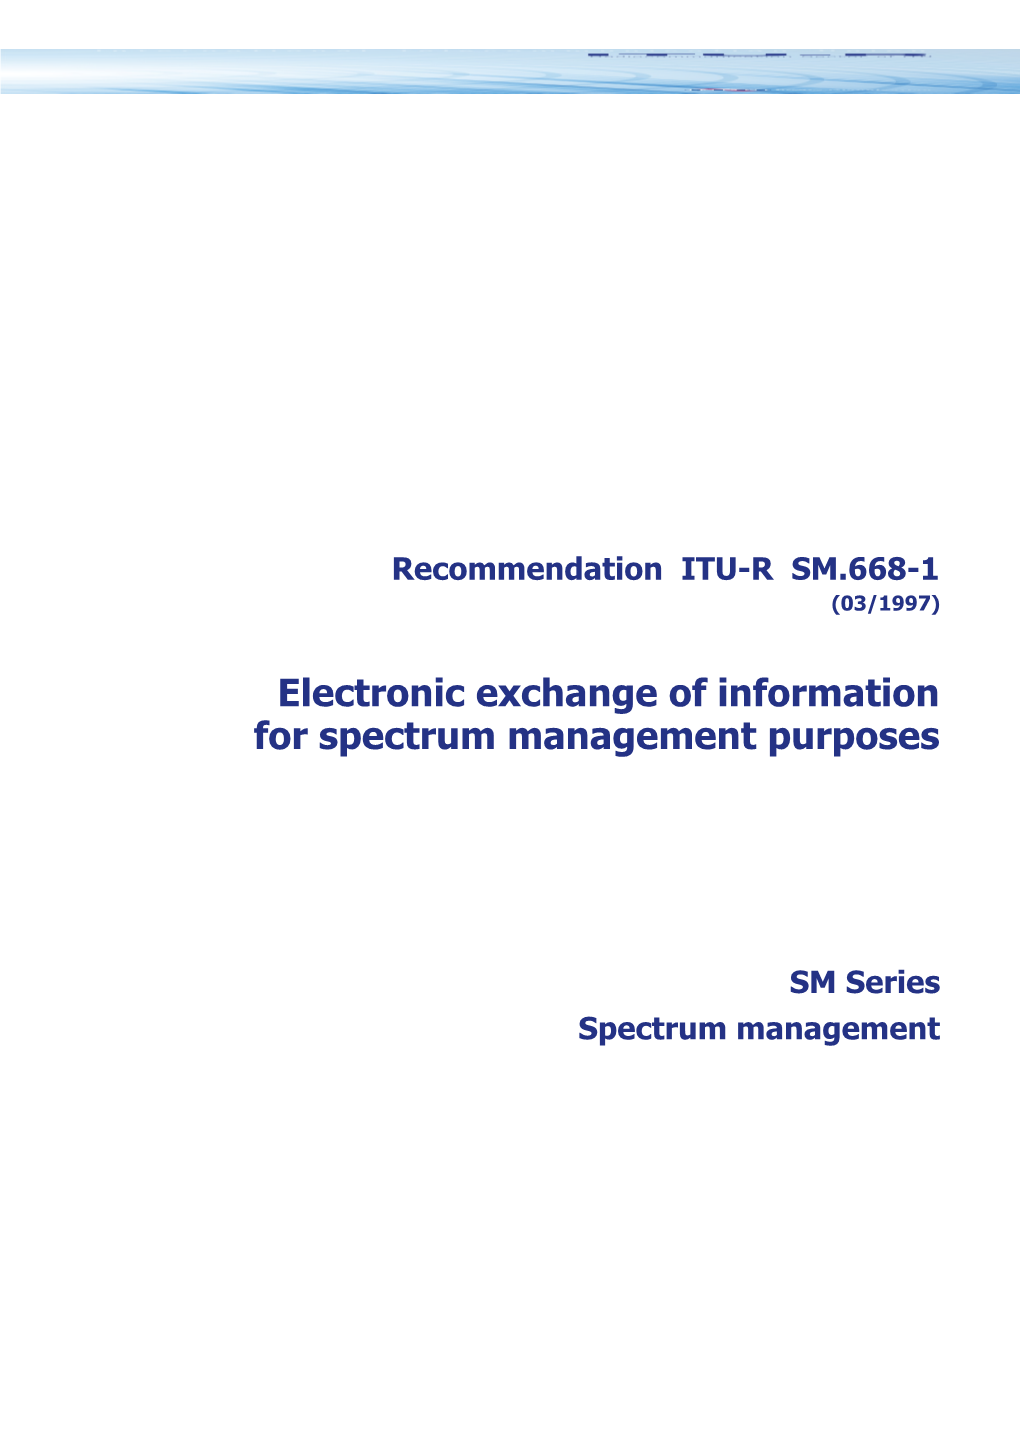 SM.668-1 - Electronic Exchange of Information for Spectrum Management Purposes